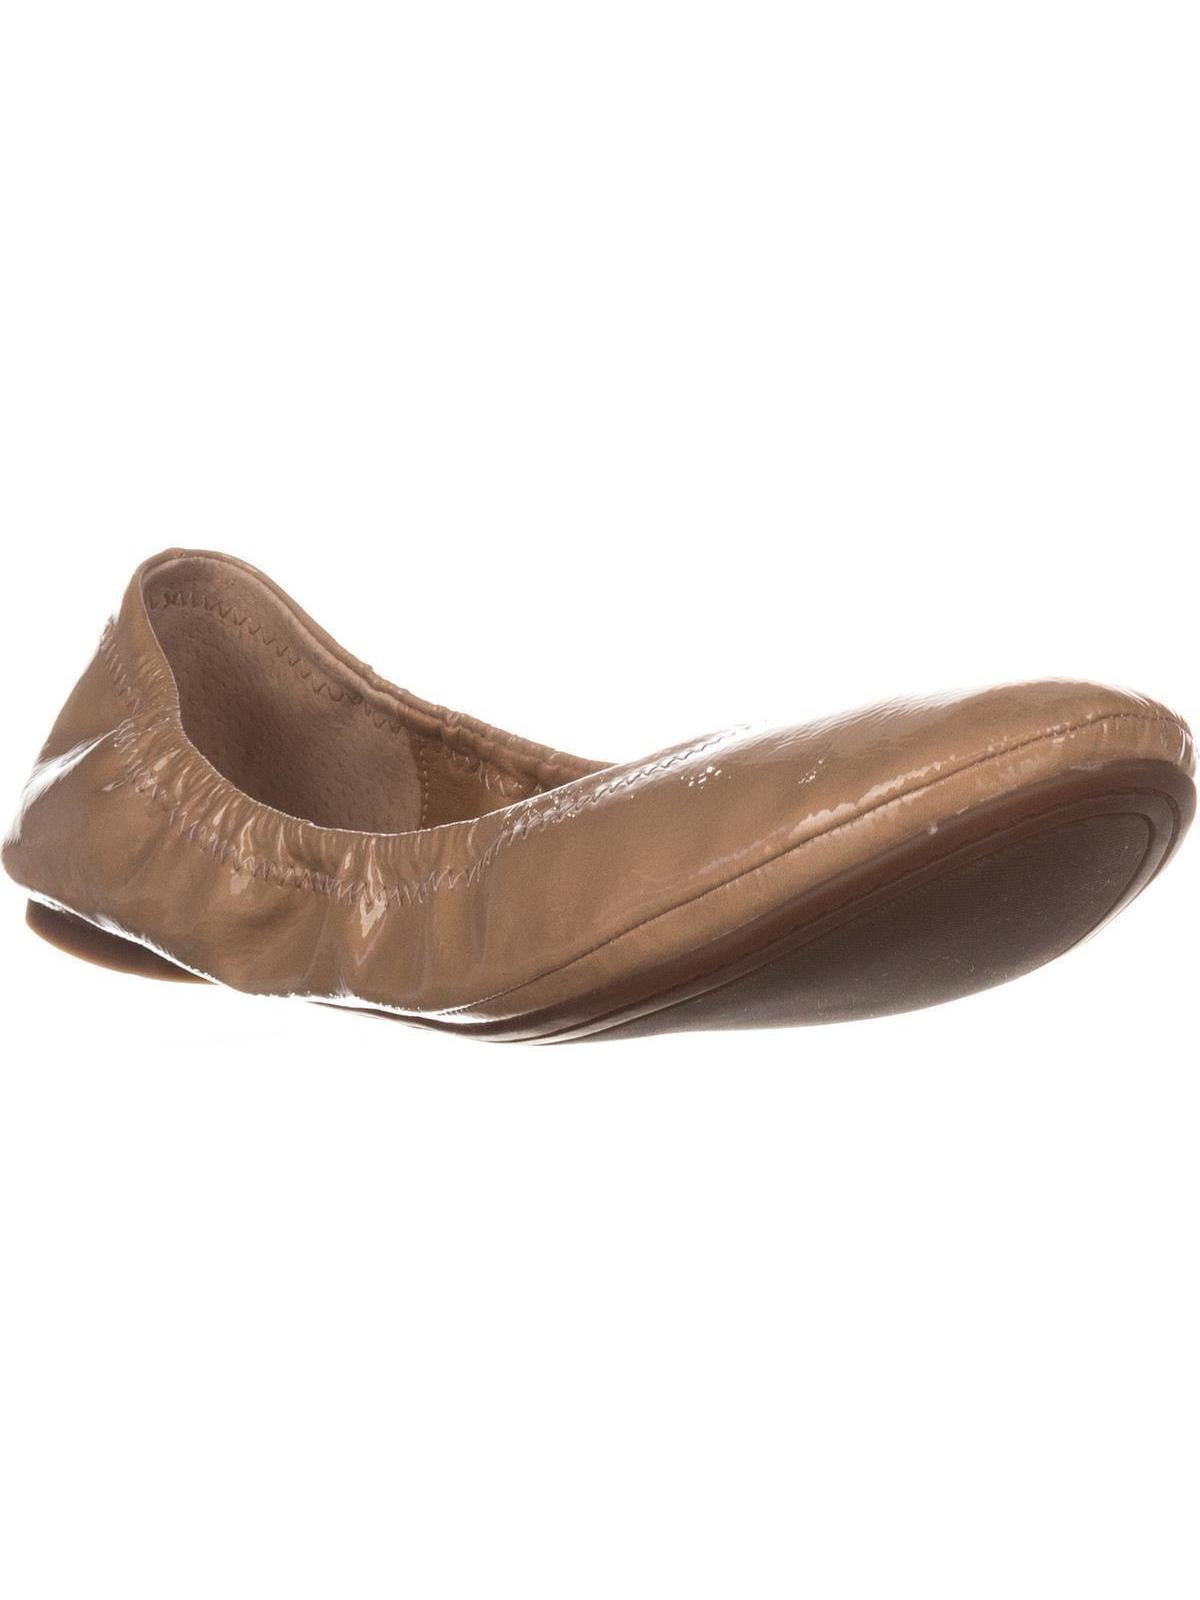 Lucky Brand Women's Emmie Flats Nude Patent Hami Mirror Size 7 M 